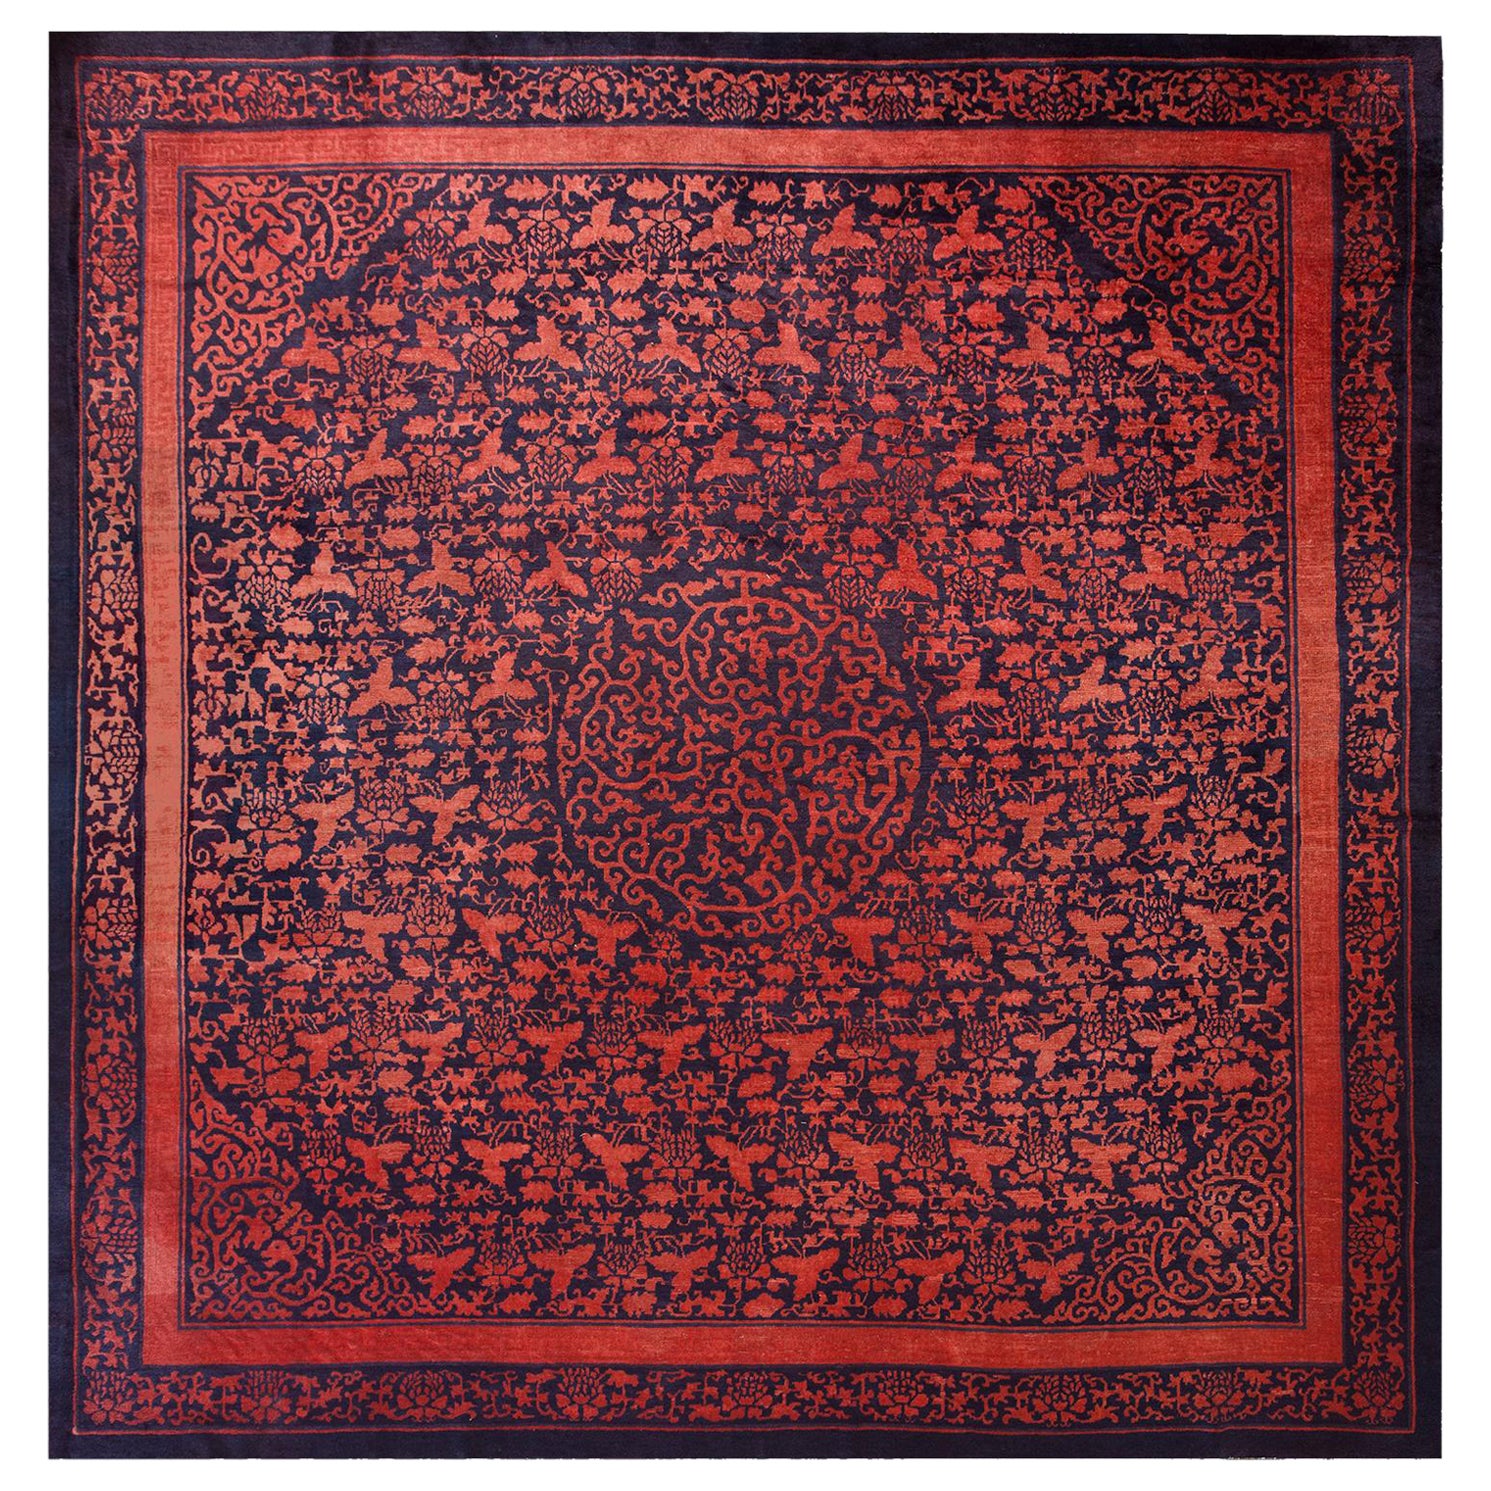 Mid 19th Century W. Chinese Kansu Carpet ( 11'6" x 12' - 350 x 365 )  For Sale